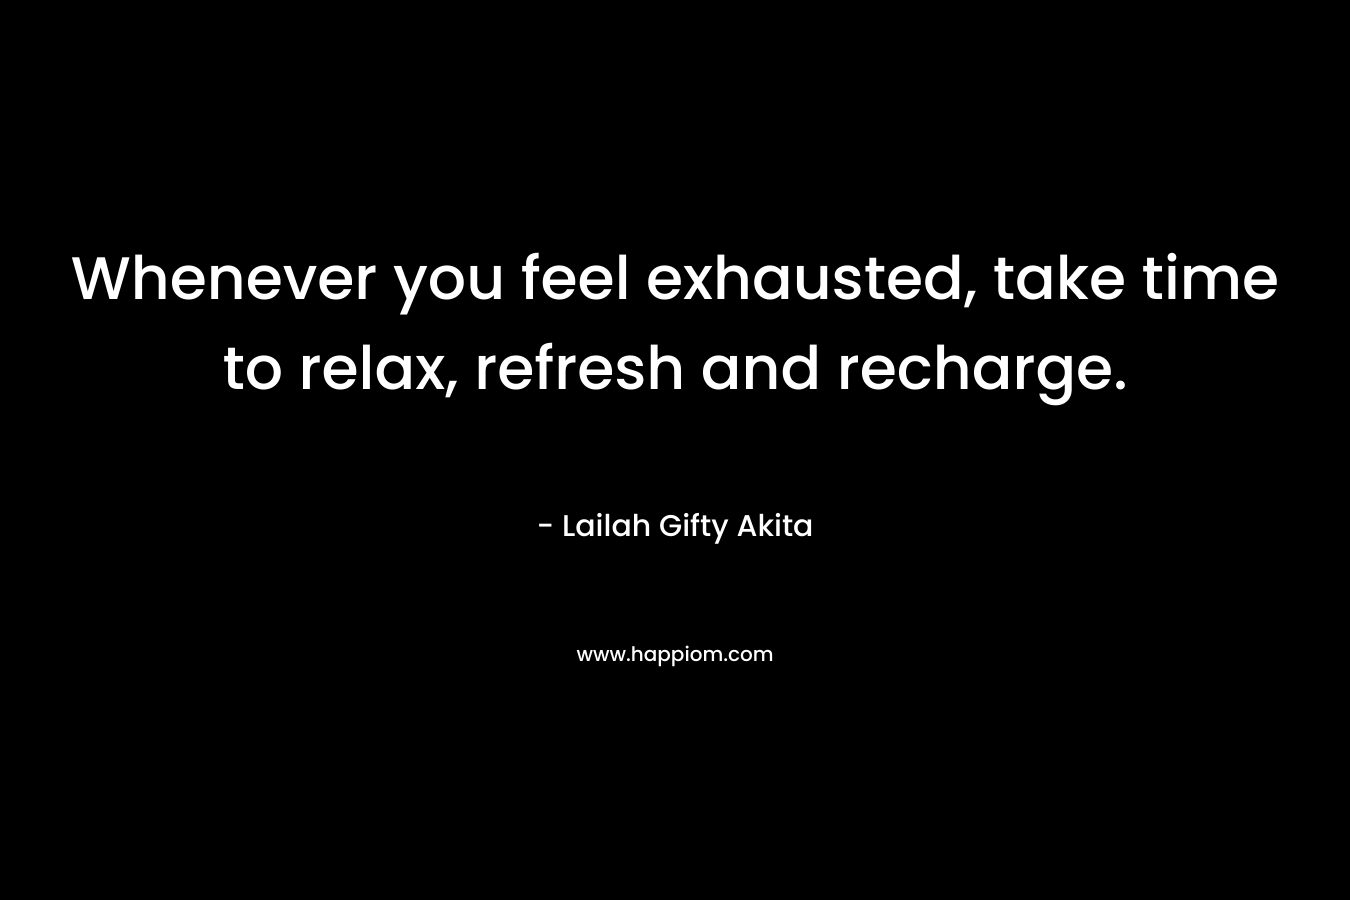 Whenever you feel exhausted, take time to relax, refresh and recharge.